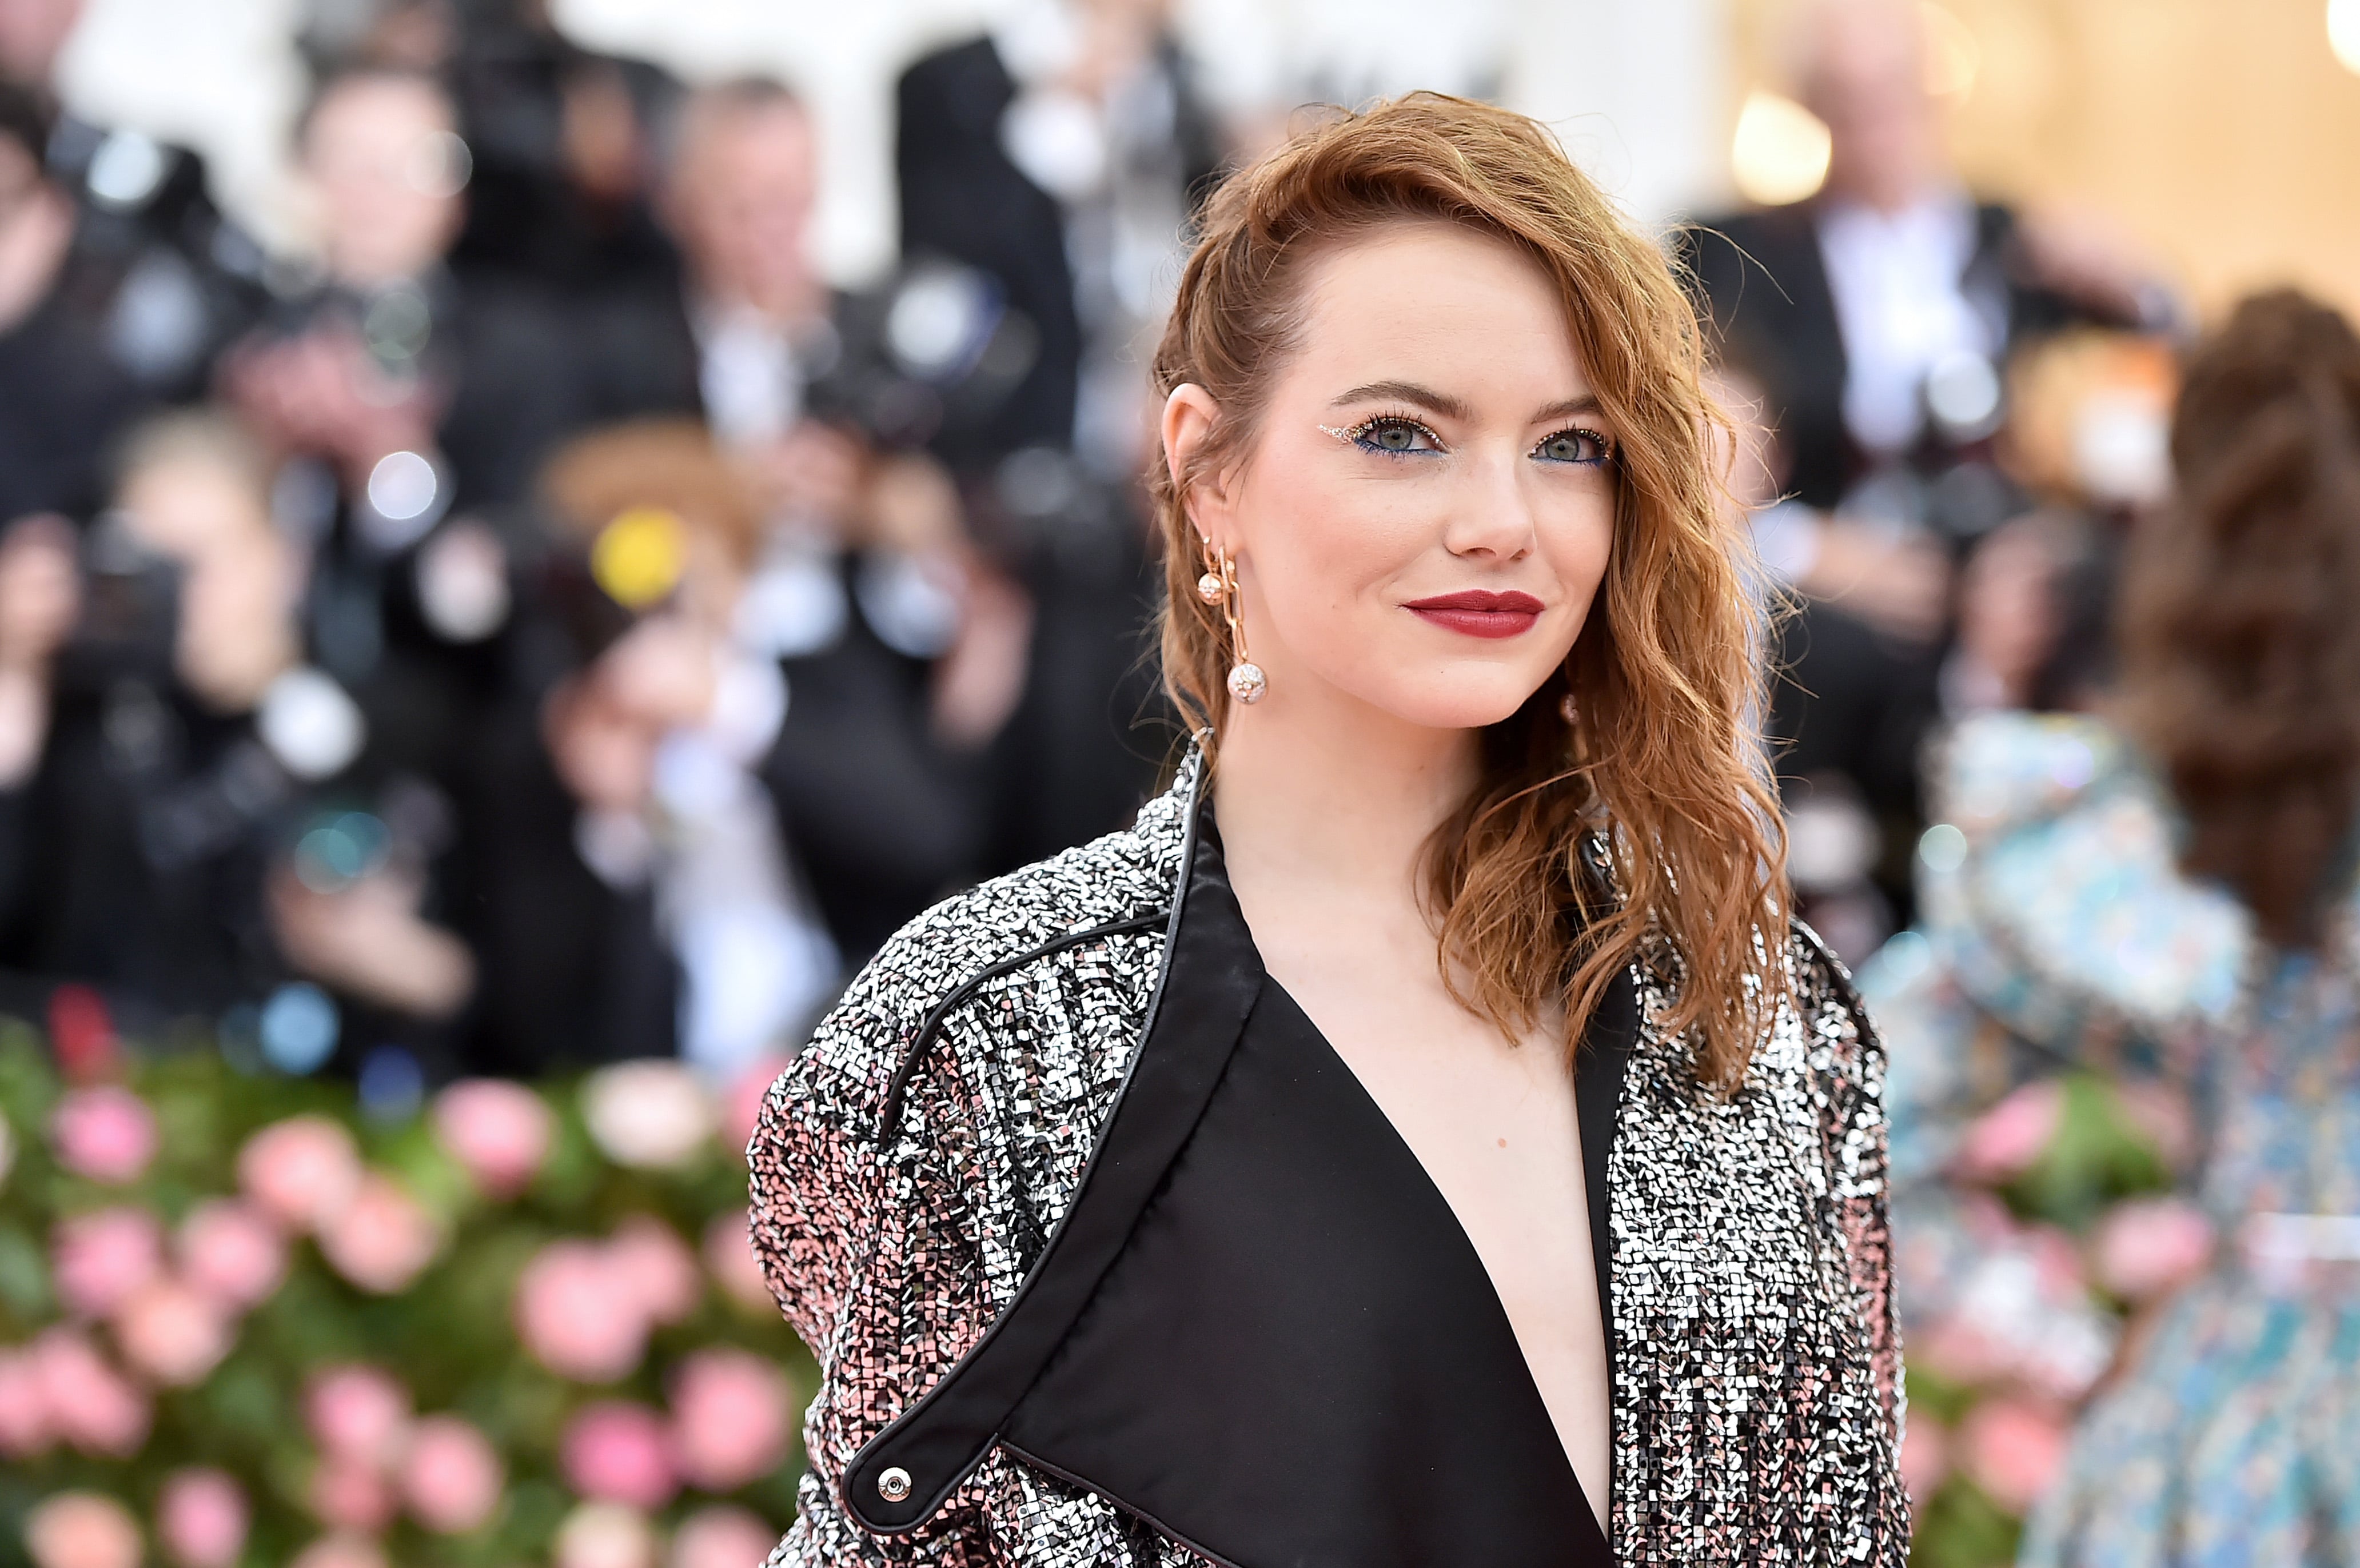 Get The Look: Emma Stone's Hair And Makeup At The 2012 Met Ball